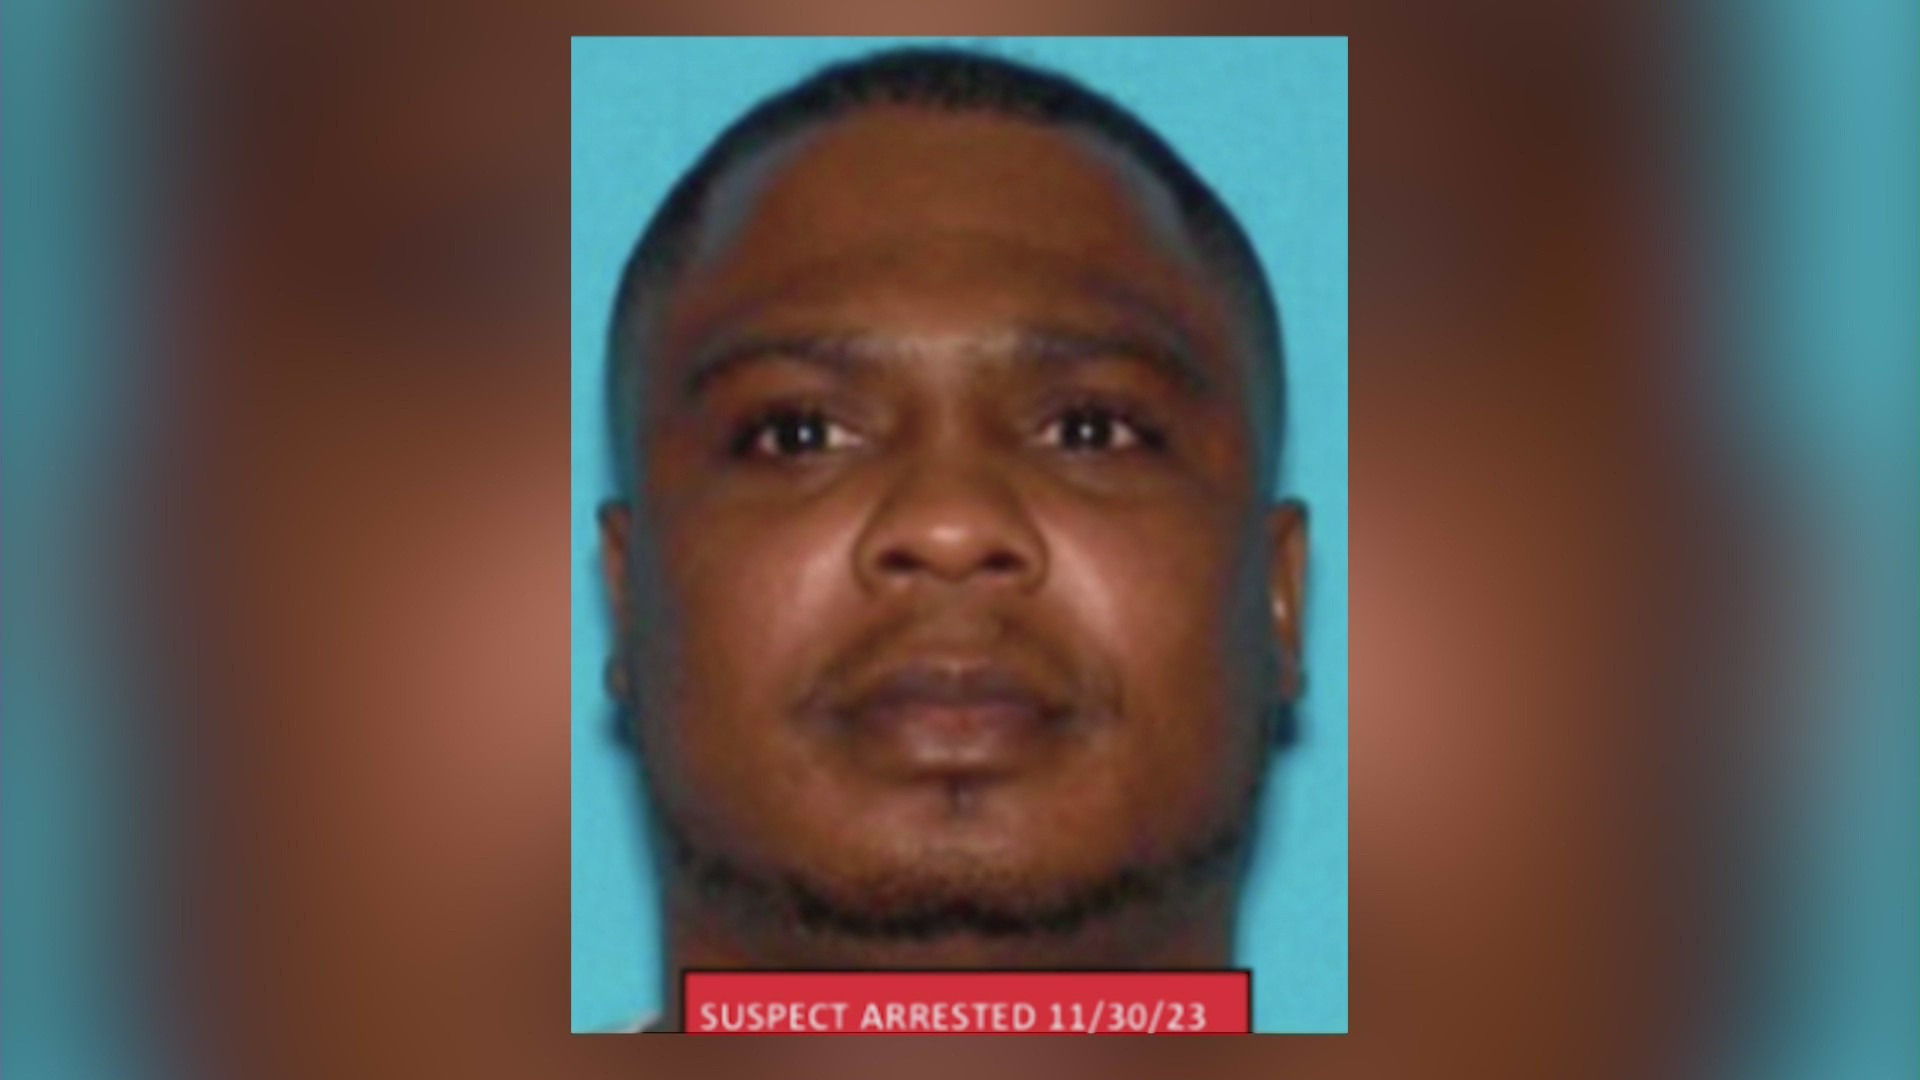 Jerrid Joseph Powell, 33, of Los Angeles, was arrested in connection with the murders of three homeless men and believed to be linked to another homicide in San Dimas. (Los Angeles Police Department)